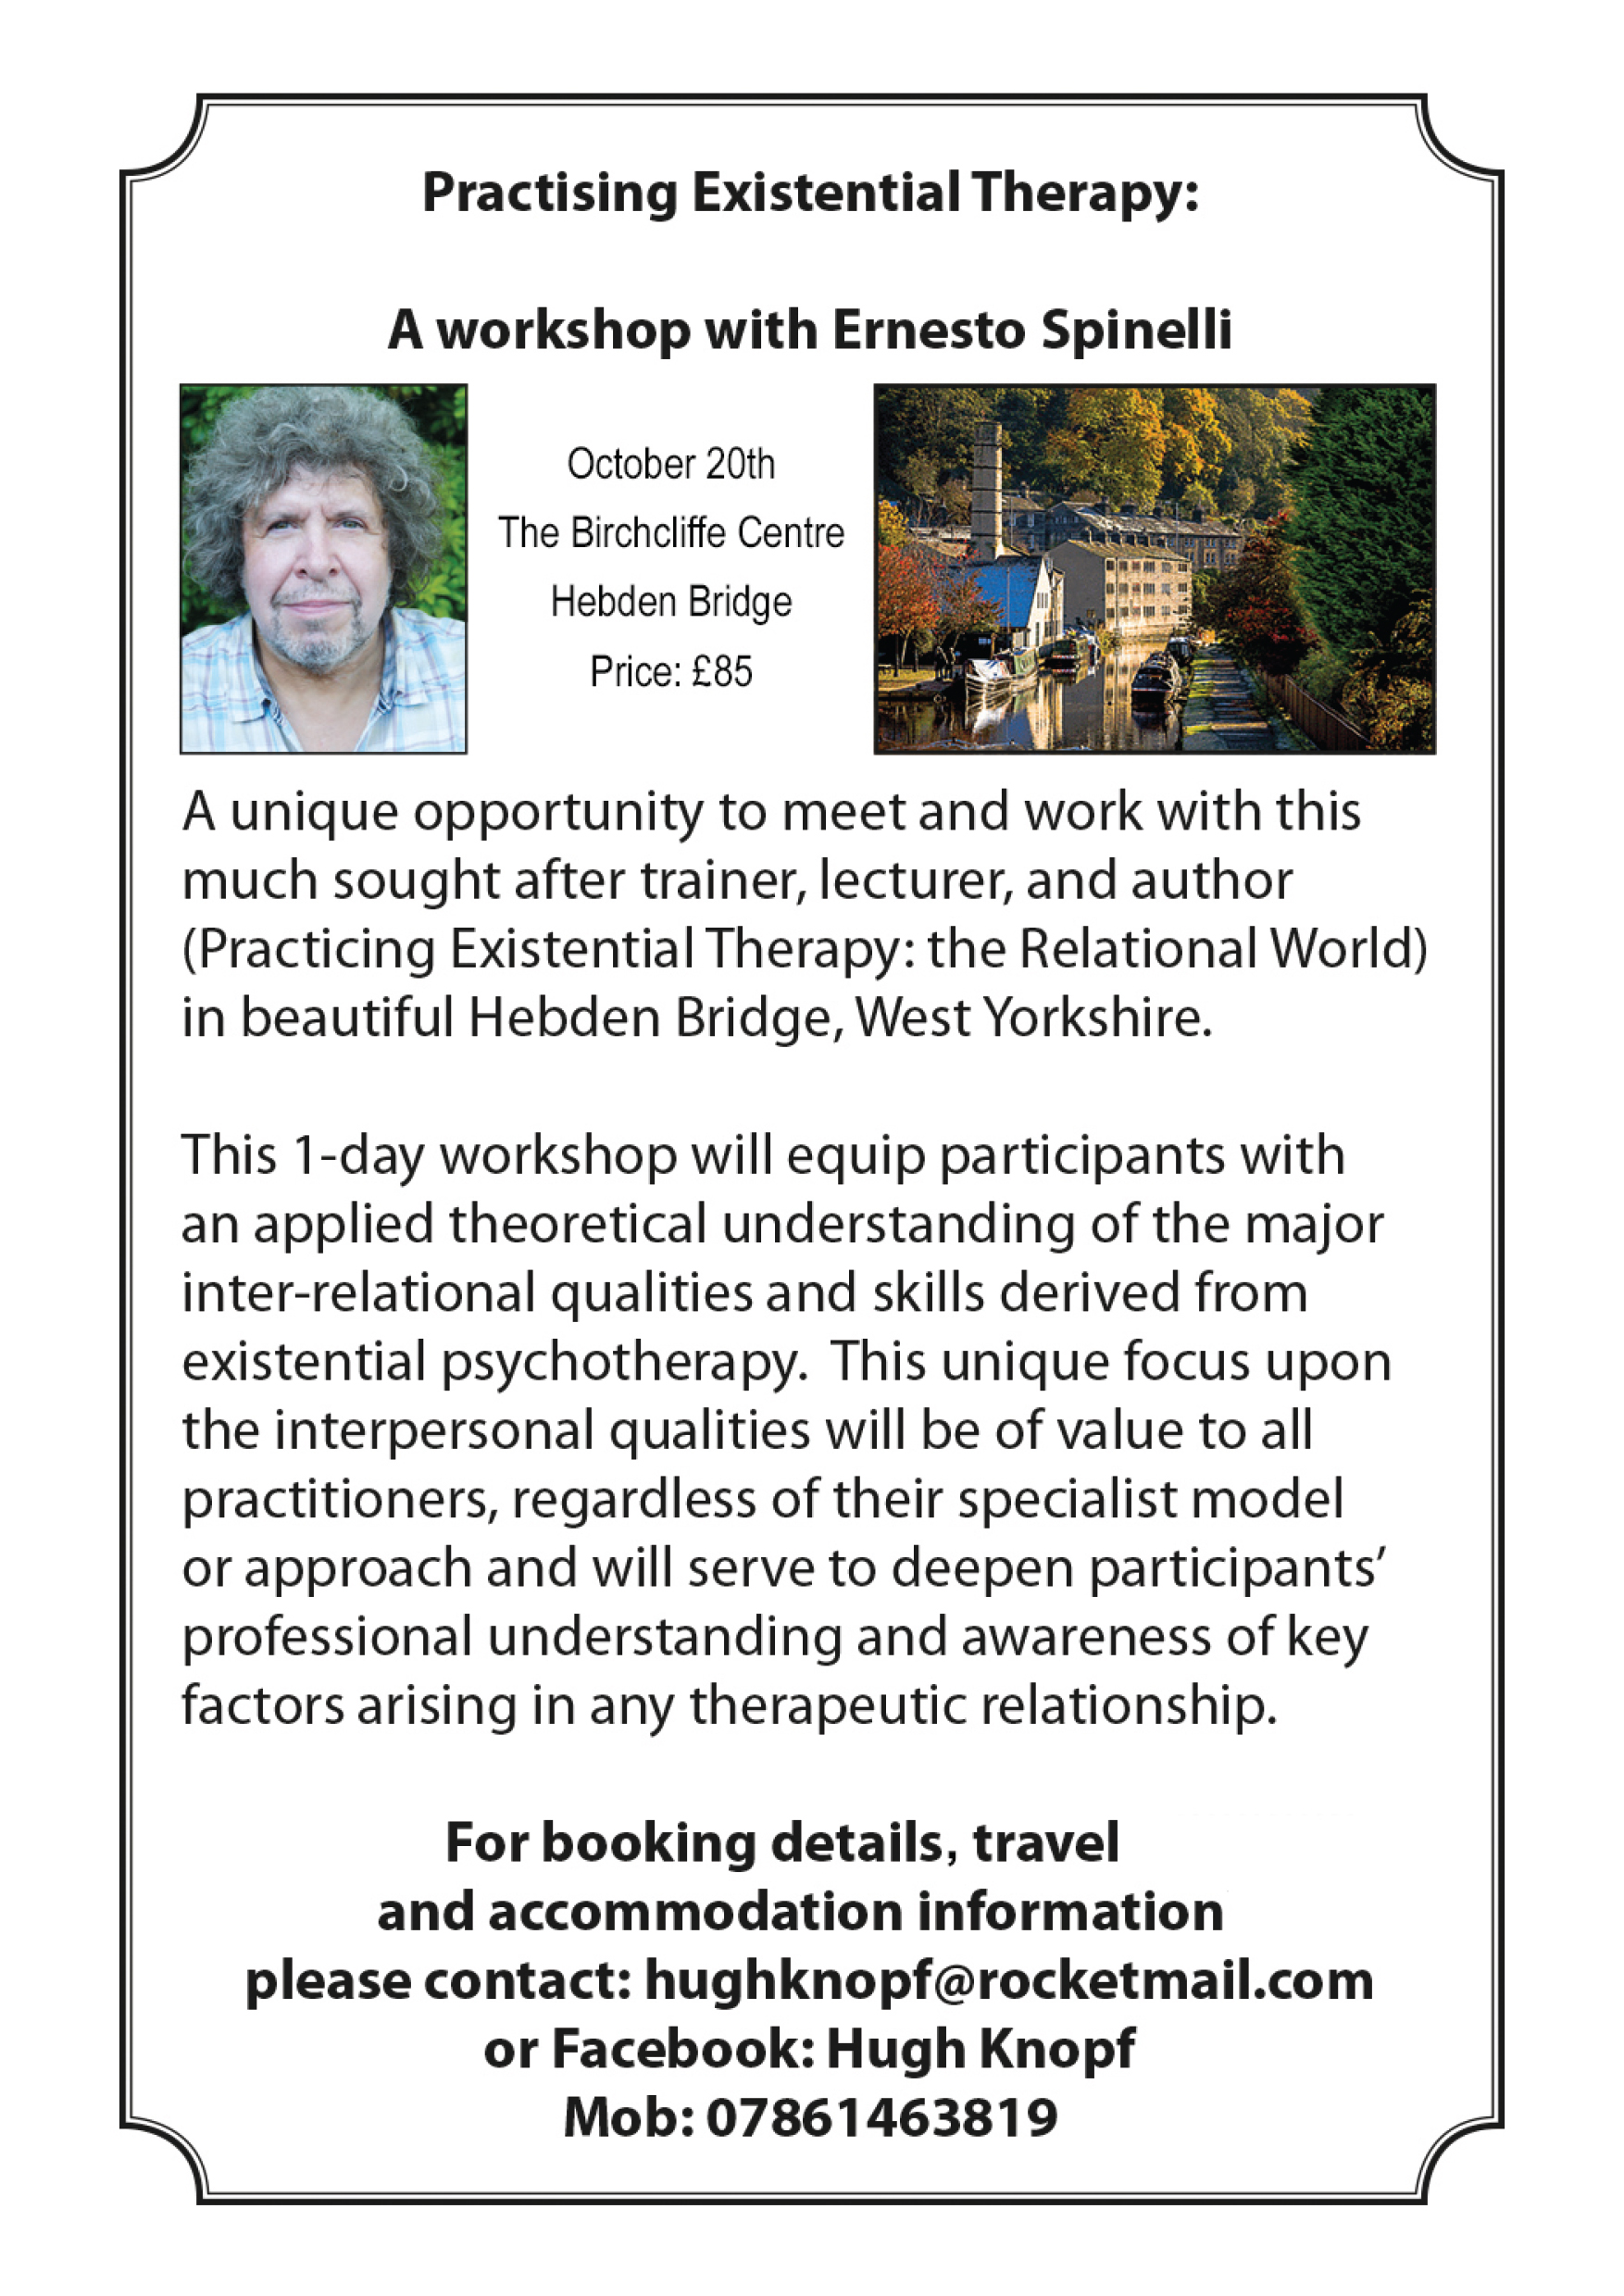 PRACTISING EXISTENTIAL PSYCHOTHERAPY  A One-Day Workshop Facilitated by Professor Ernesto Spinelli